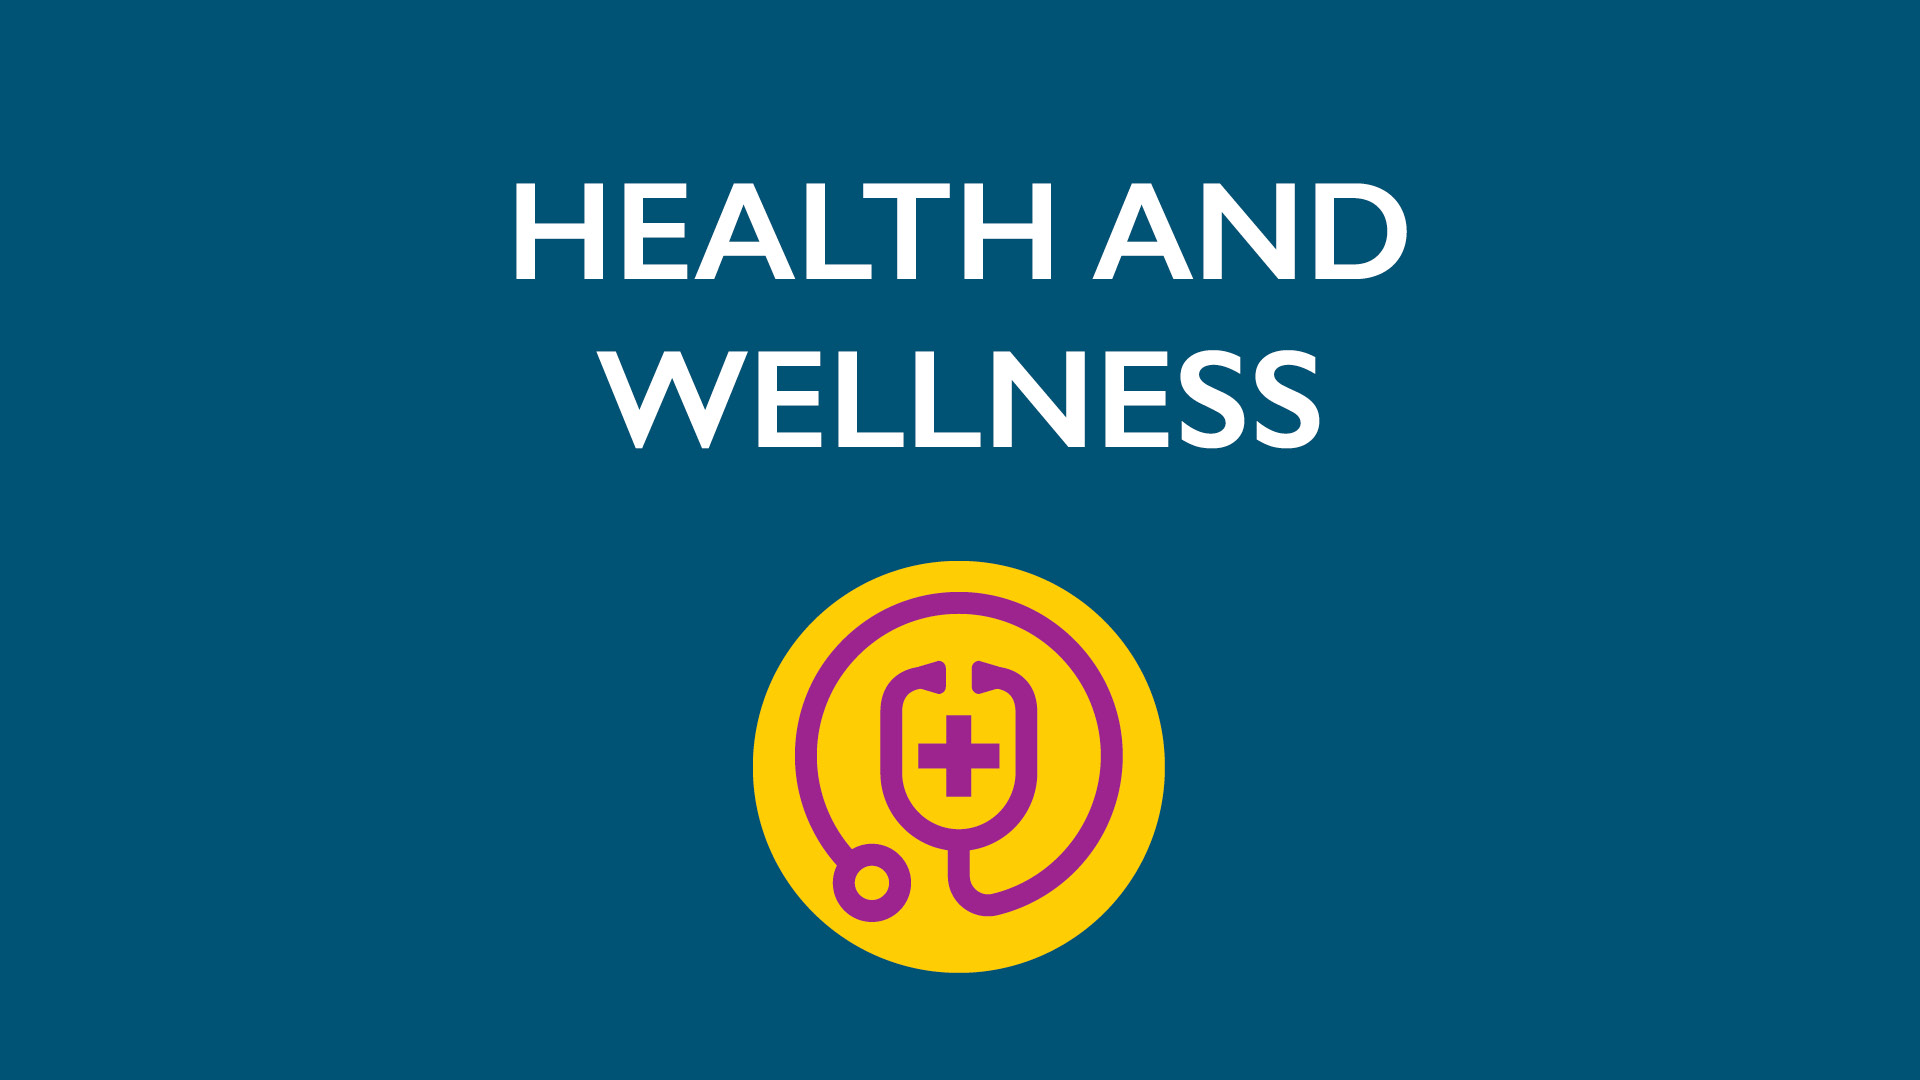 Icon of stethoscope with text Health and Wellness